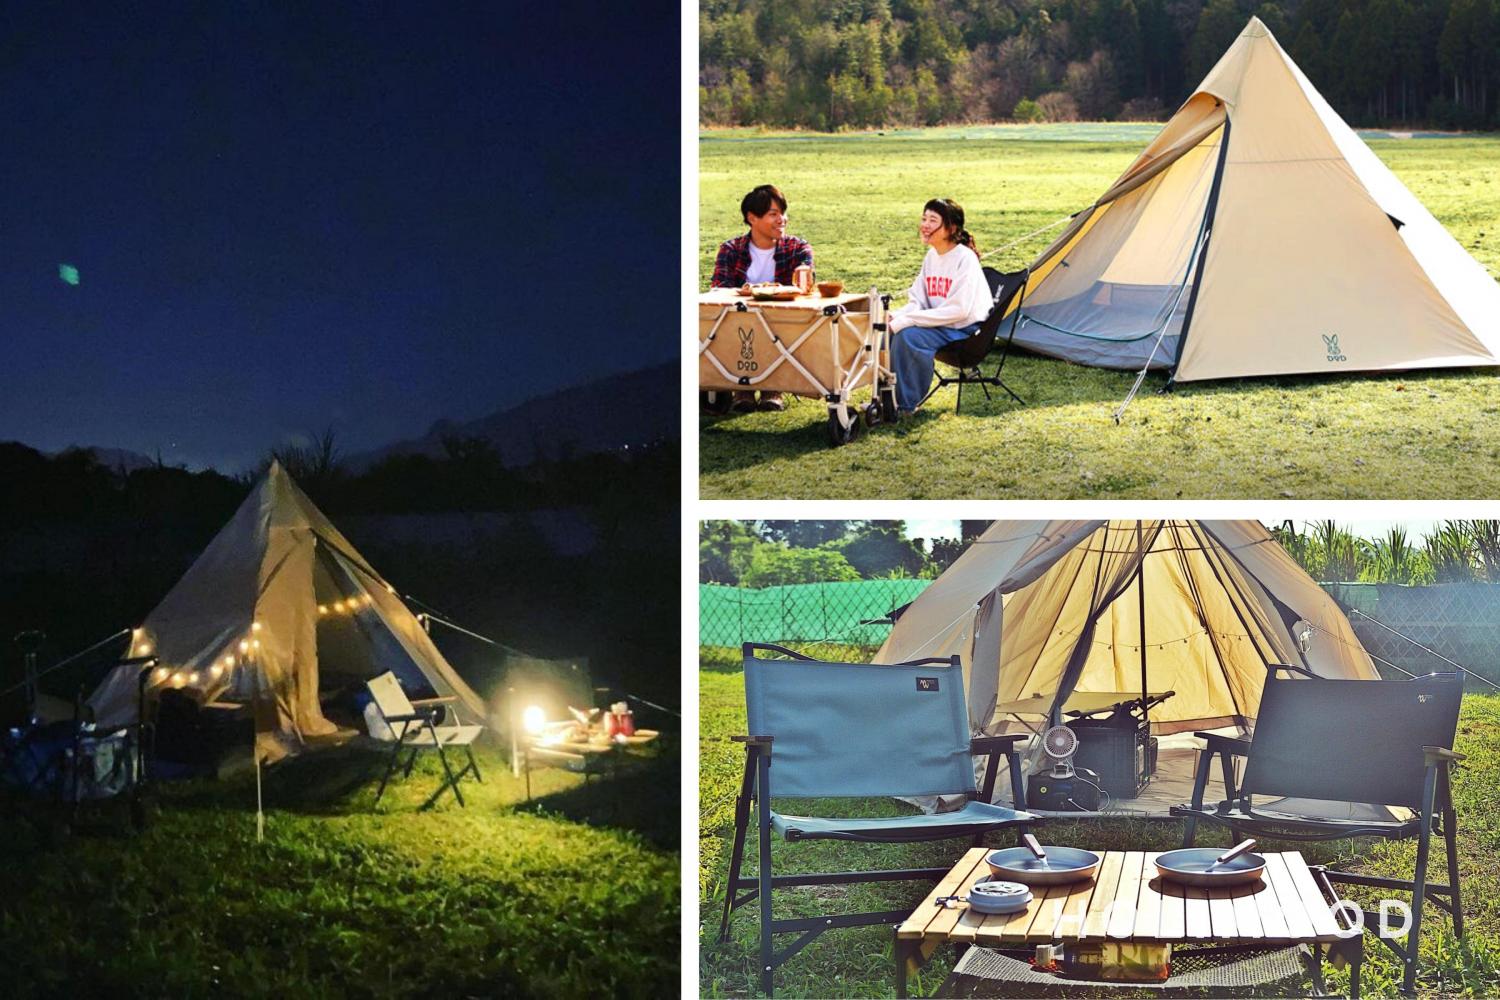 EC GO Outdoor - Camping Gear Rental Hot brand D.O.D. Teepee tent gear rental set (for 2 pax) free delivery 1